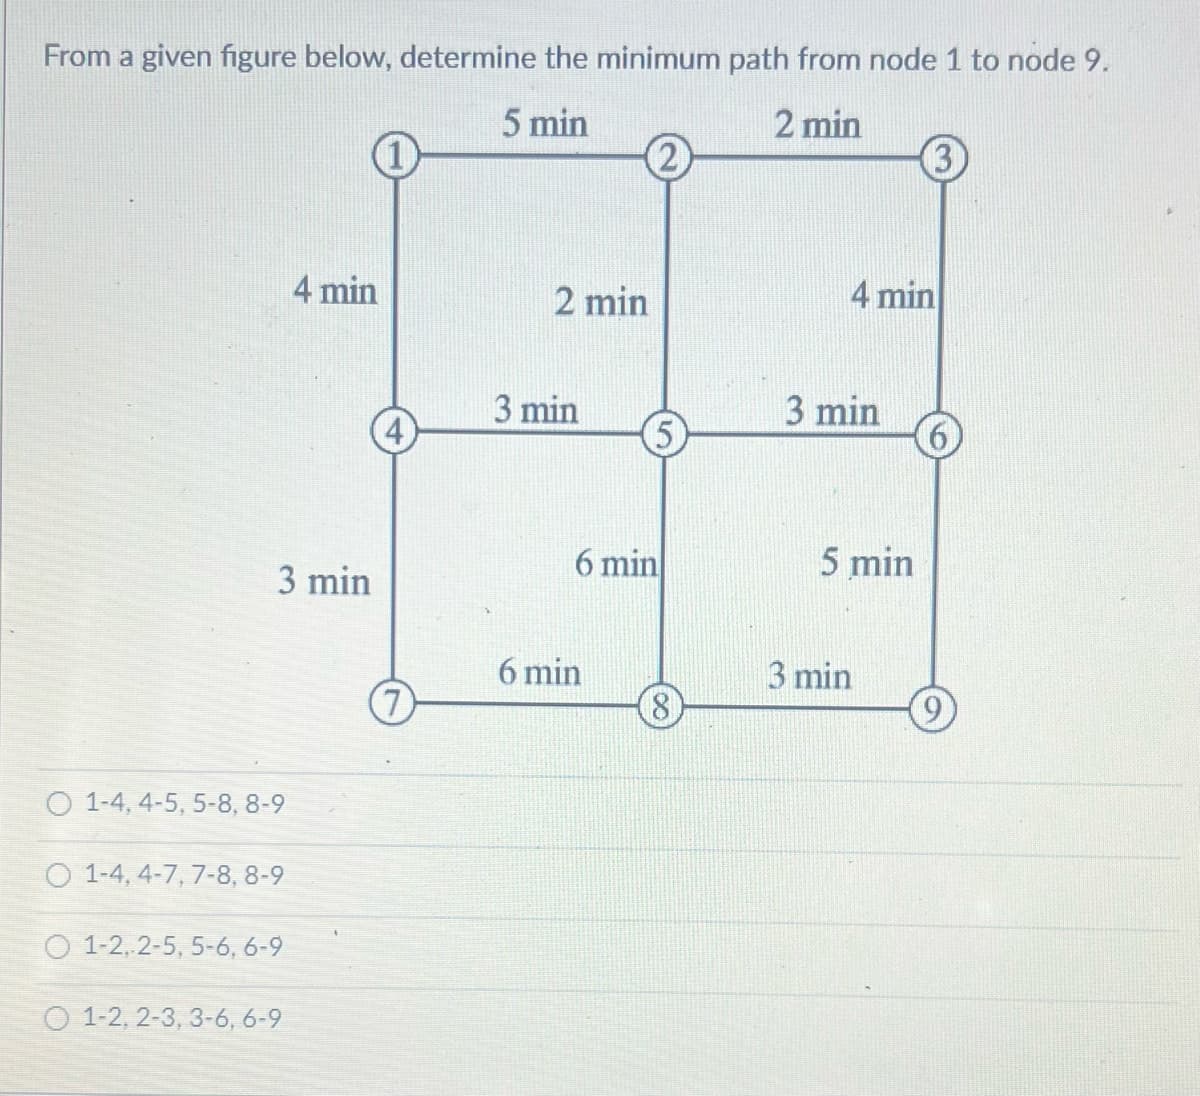 From a given figure below, determine the minimum path from node 1 to node 9.
5 min
2 min
3 min
O 1-4, 4-5, 5-8, 8-9
O 1-4, 4-7, 7-8, 8-9
O 1-2,2-5, 5-6, 6-9
4 min
O 1-2, 2-3, 3-6, 6-9
(7)
2 min
3 min
(5
6 min
6 min
8
4 min
3 min
5 min
(3)
3 min